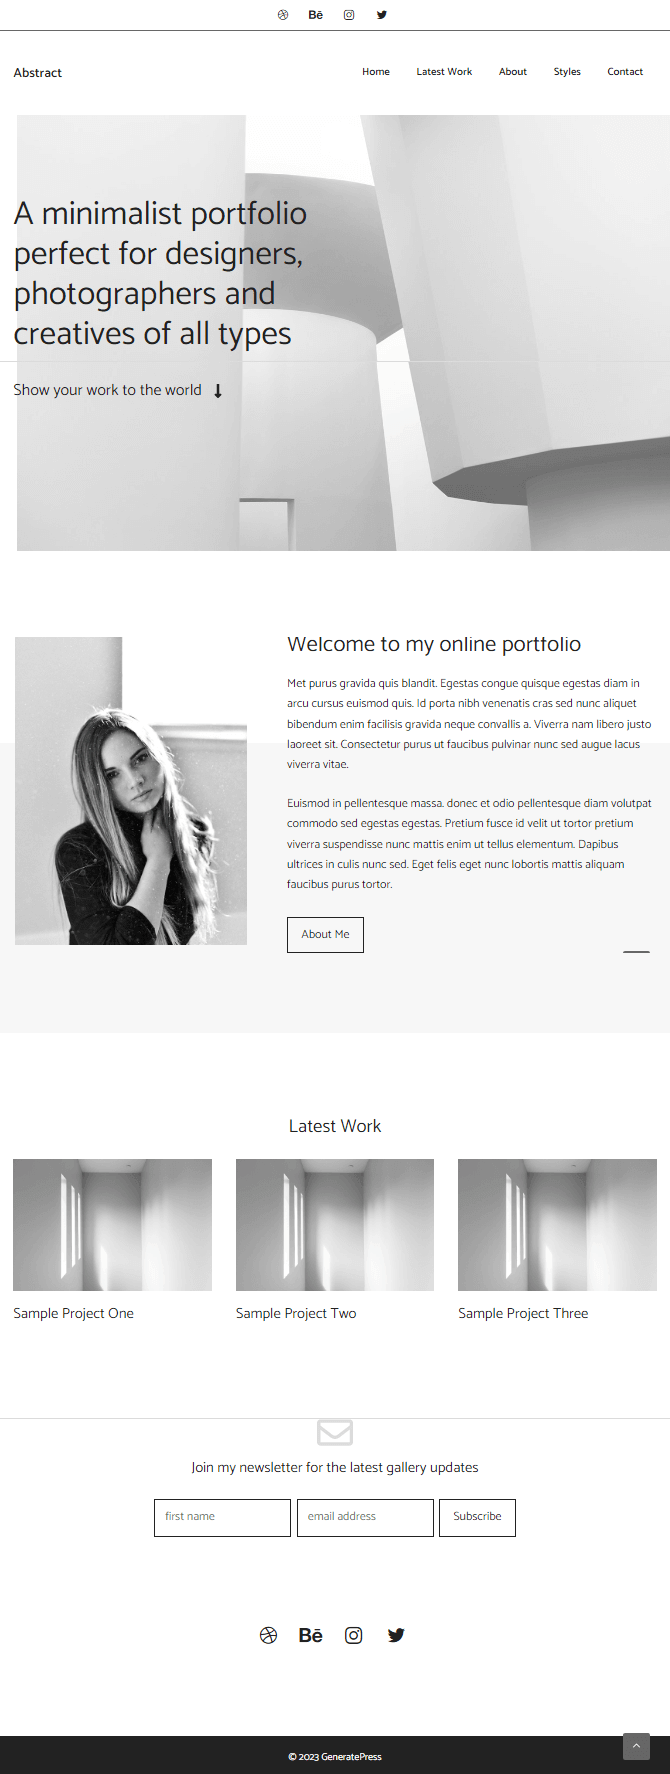 homepage of abstract - a generatepress starter site for creating portfolio website